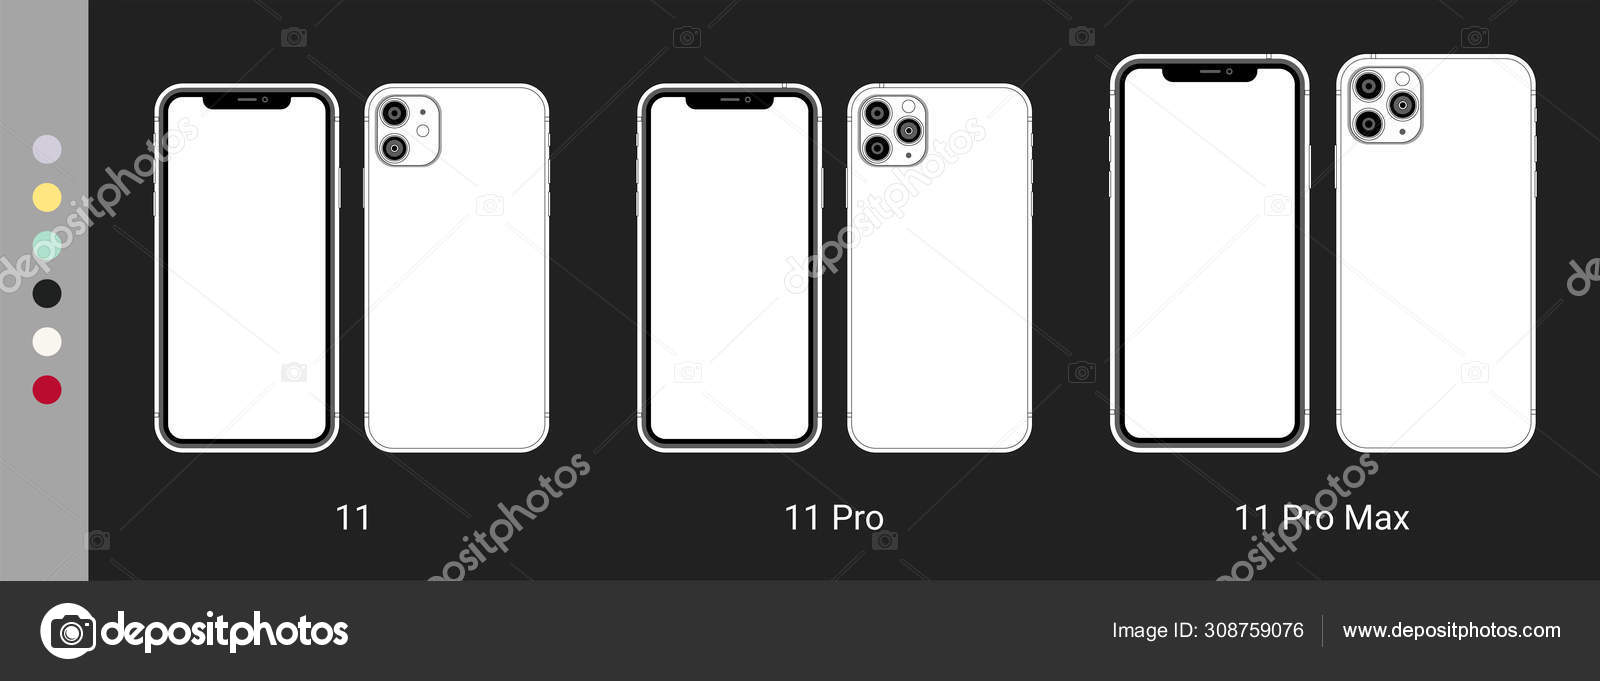 New Iphone 11 Pro Max Flat Graphic Illustration Stock Vector Image By C Alx1618